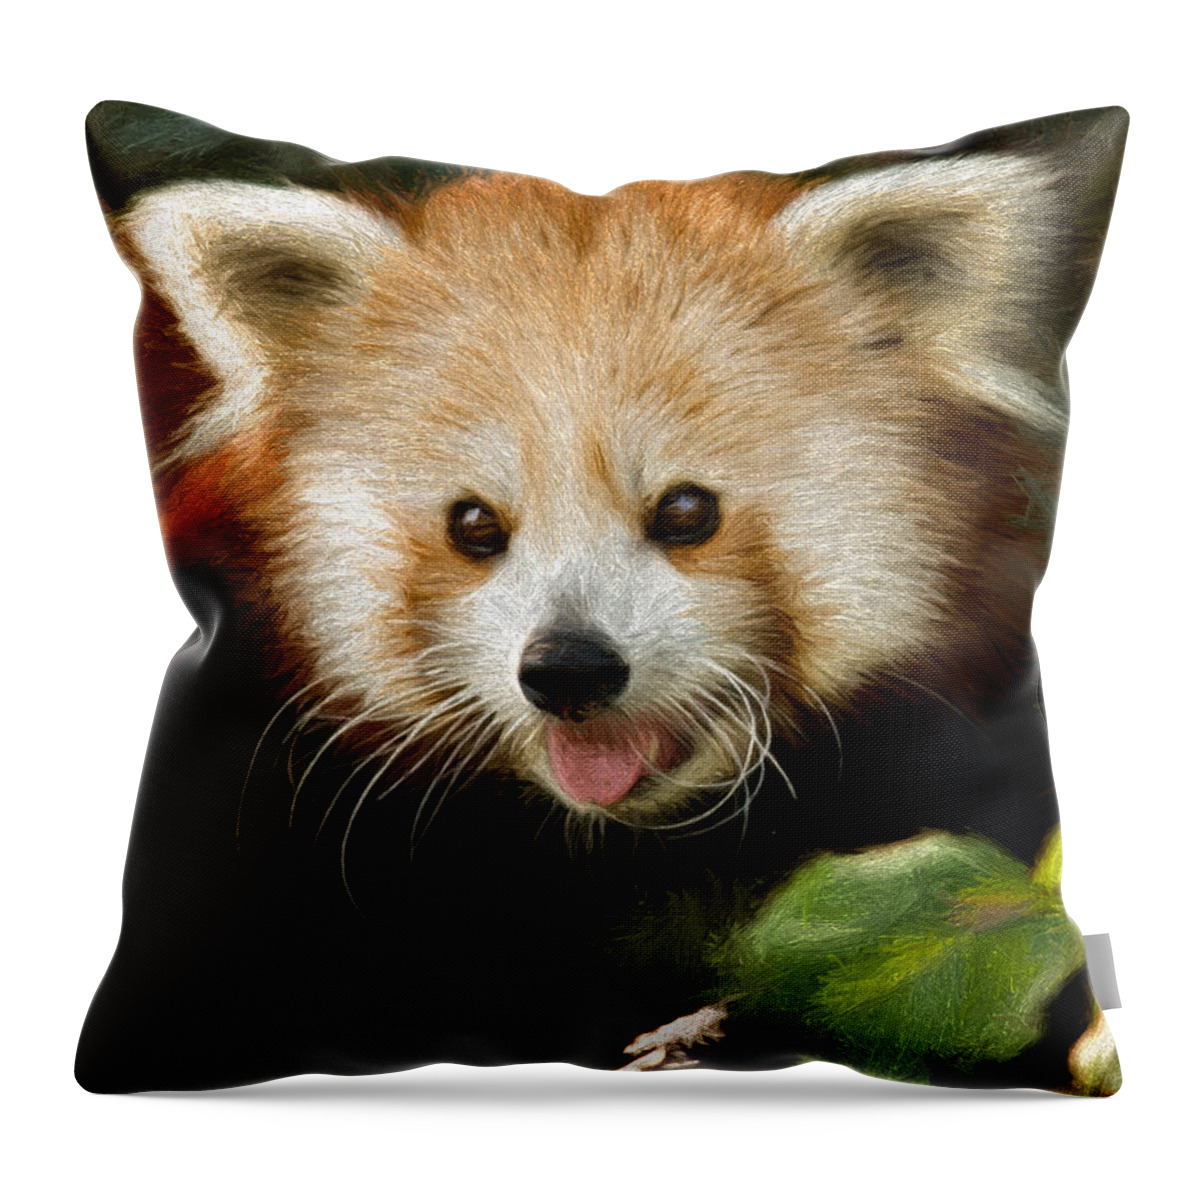 Adorable Throw Pillow featuring the photograph Red Panda by Lana Trussell